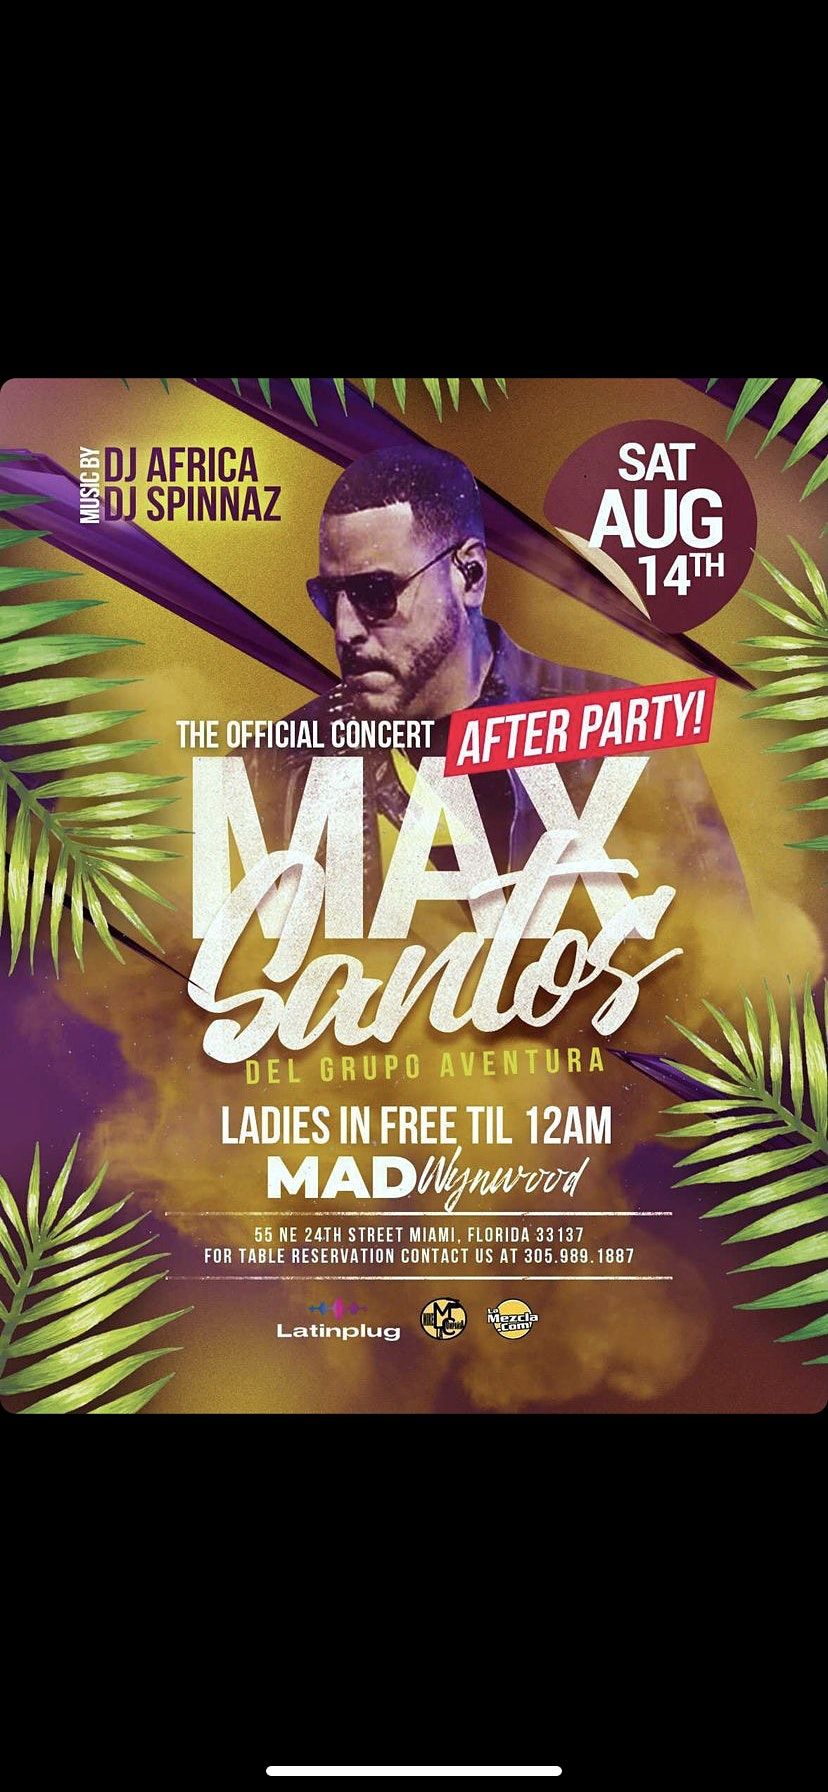 OFFICIAL CONCERT AFTERPARTY HOSTED BY MAX SANTOS DEL GRUPO AVENTURA & MORE!